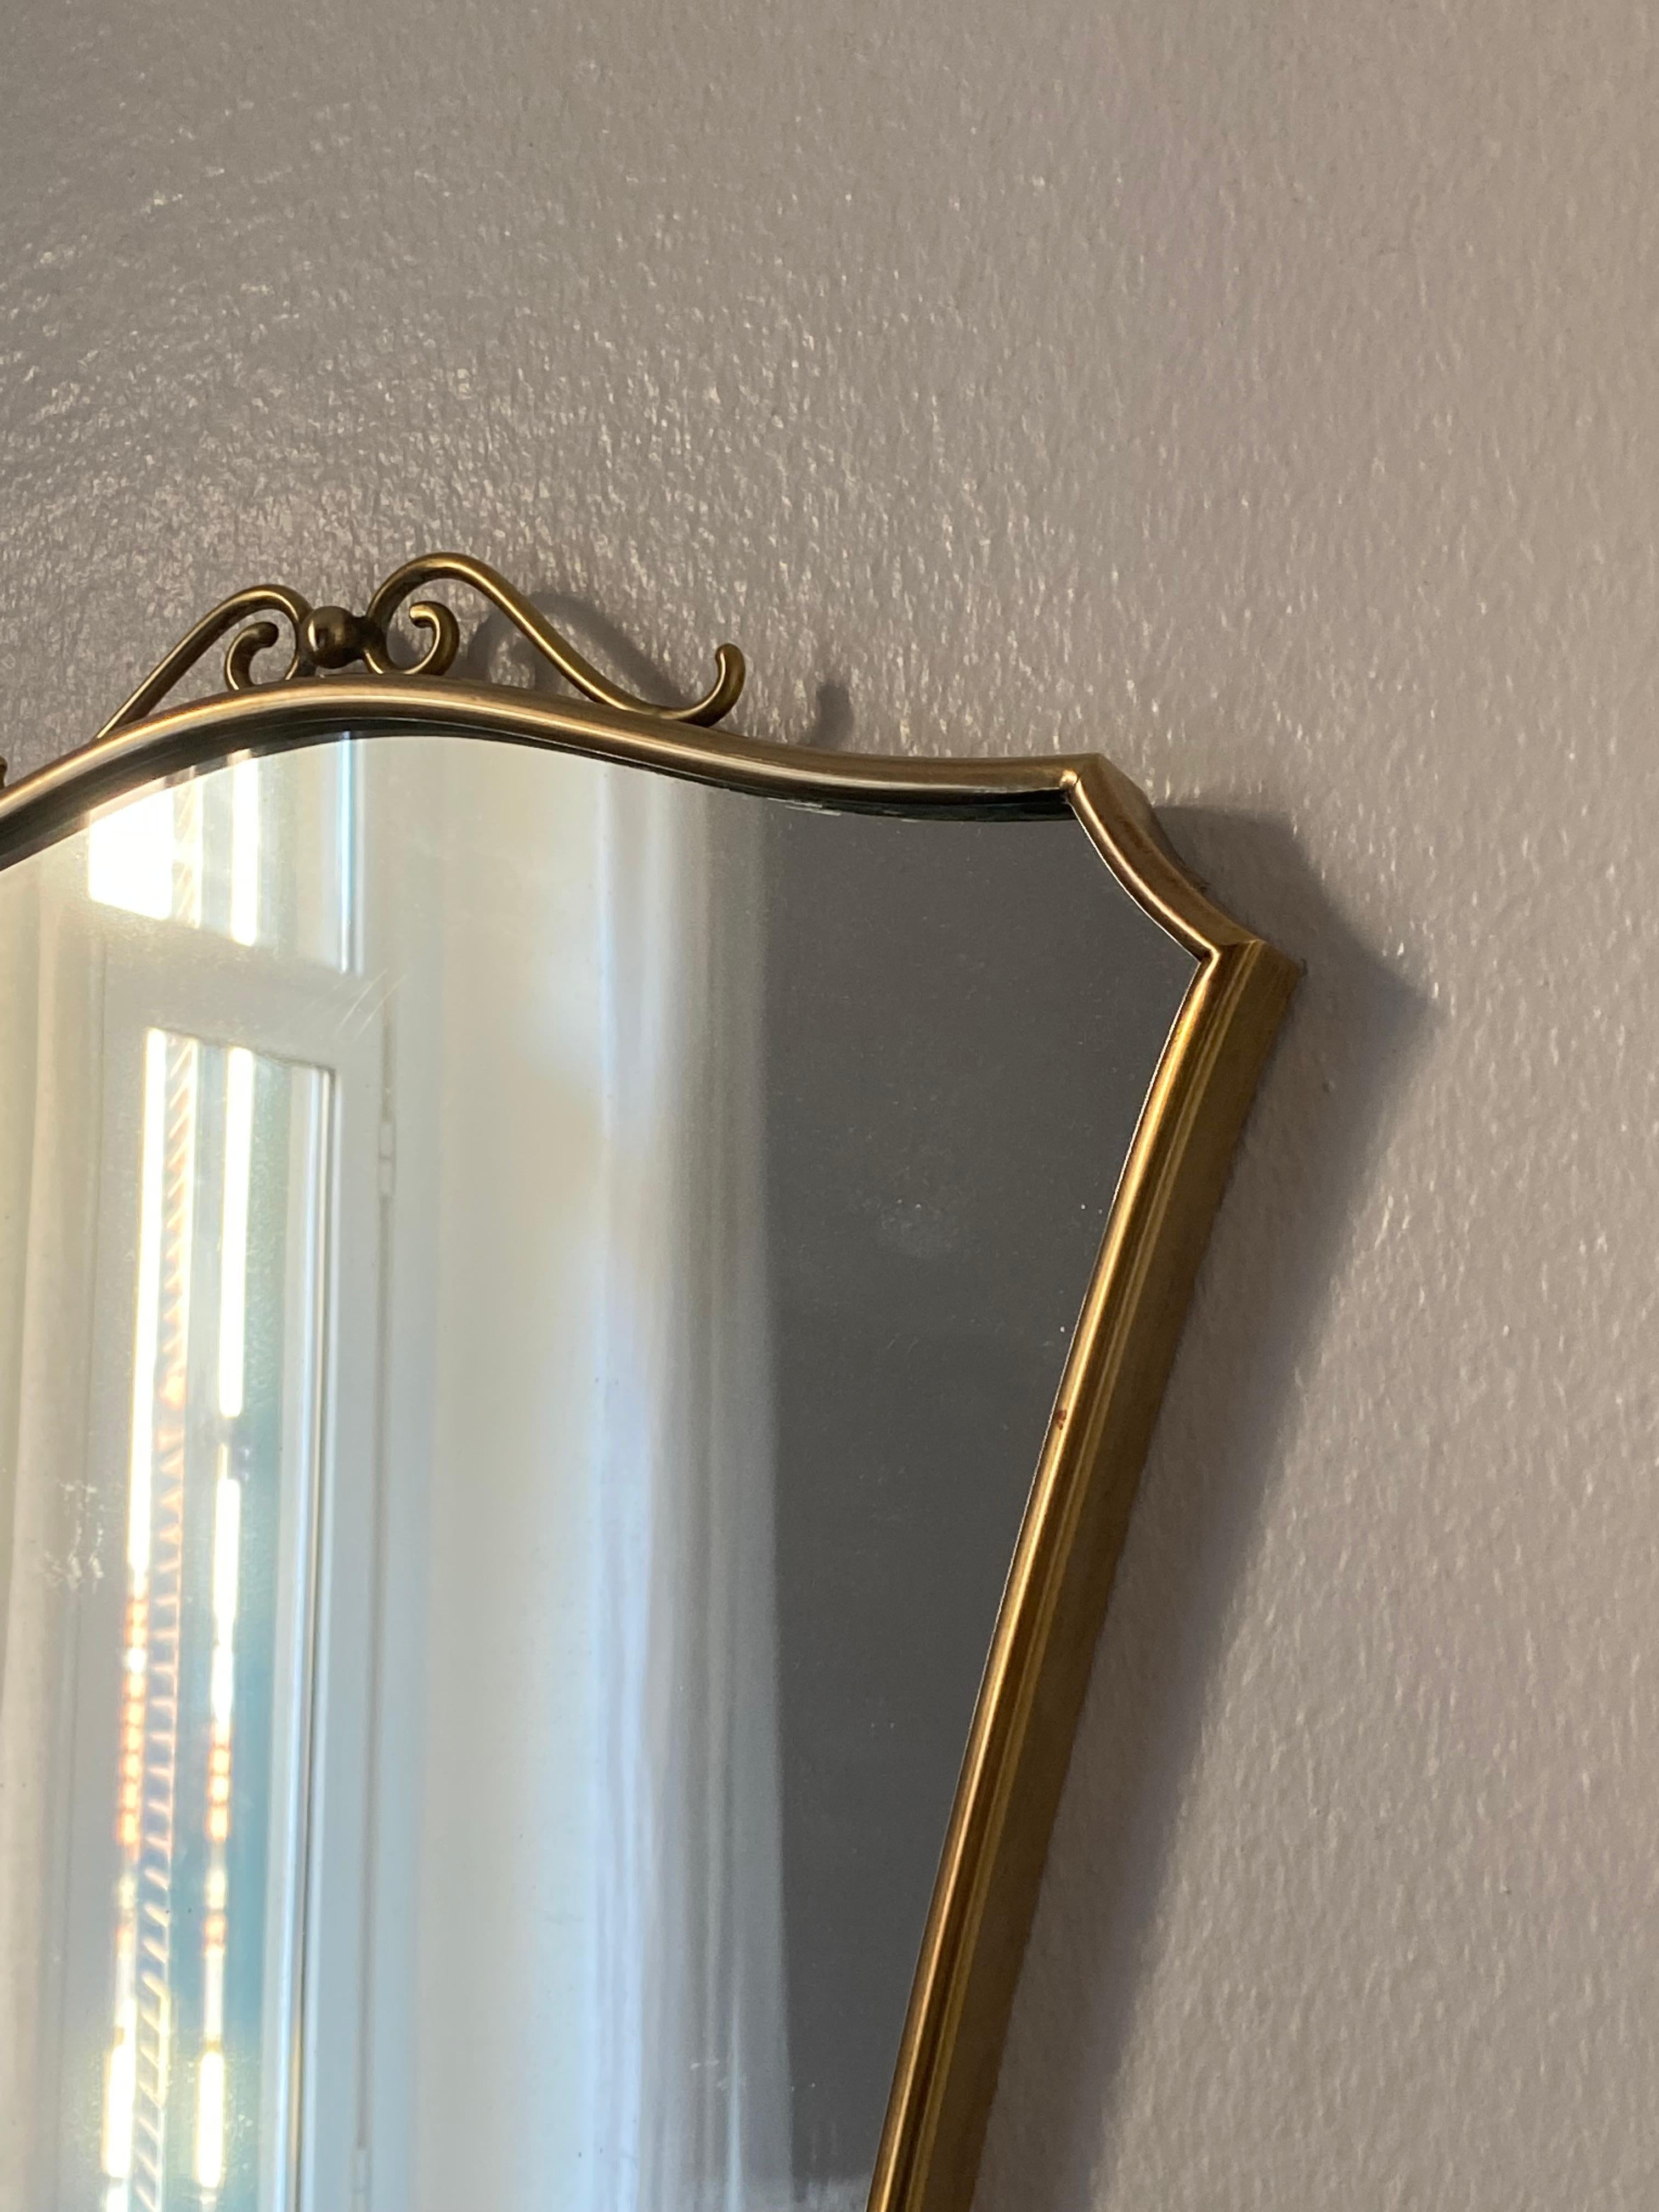 A pair of wall mirrors of intimate scale, produced in Italy, 1940s-1950s. Cut mirror glass is framed in brass. With simple modernist form and subtle ornamentation. 

Other designers of the period include Gio Ponti, Fontana Arte, Max Ingrand,